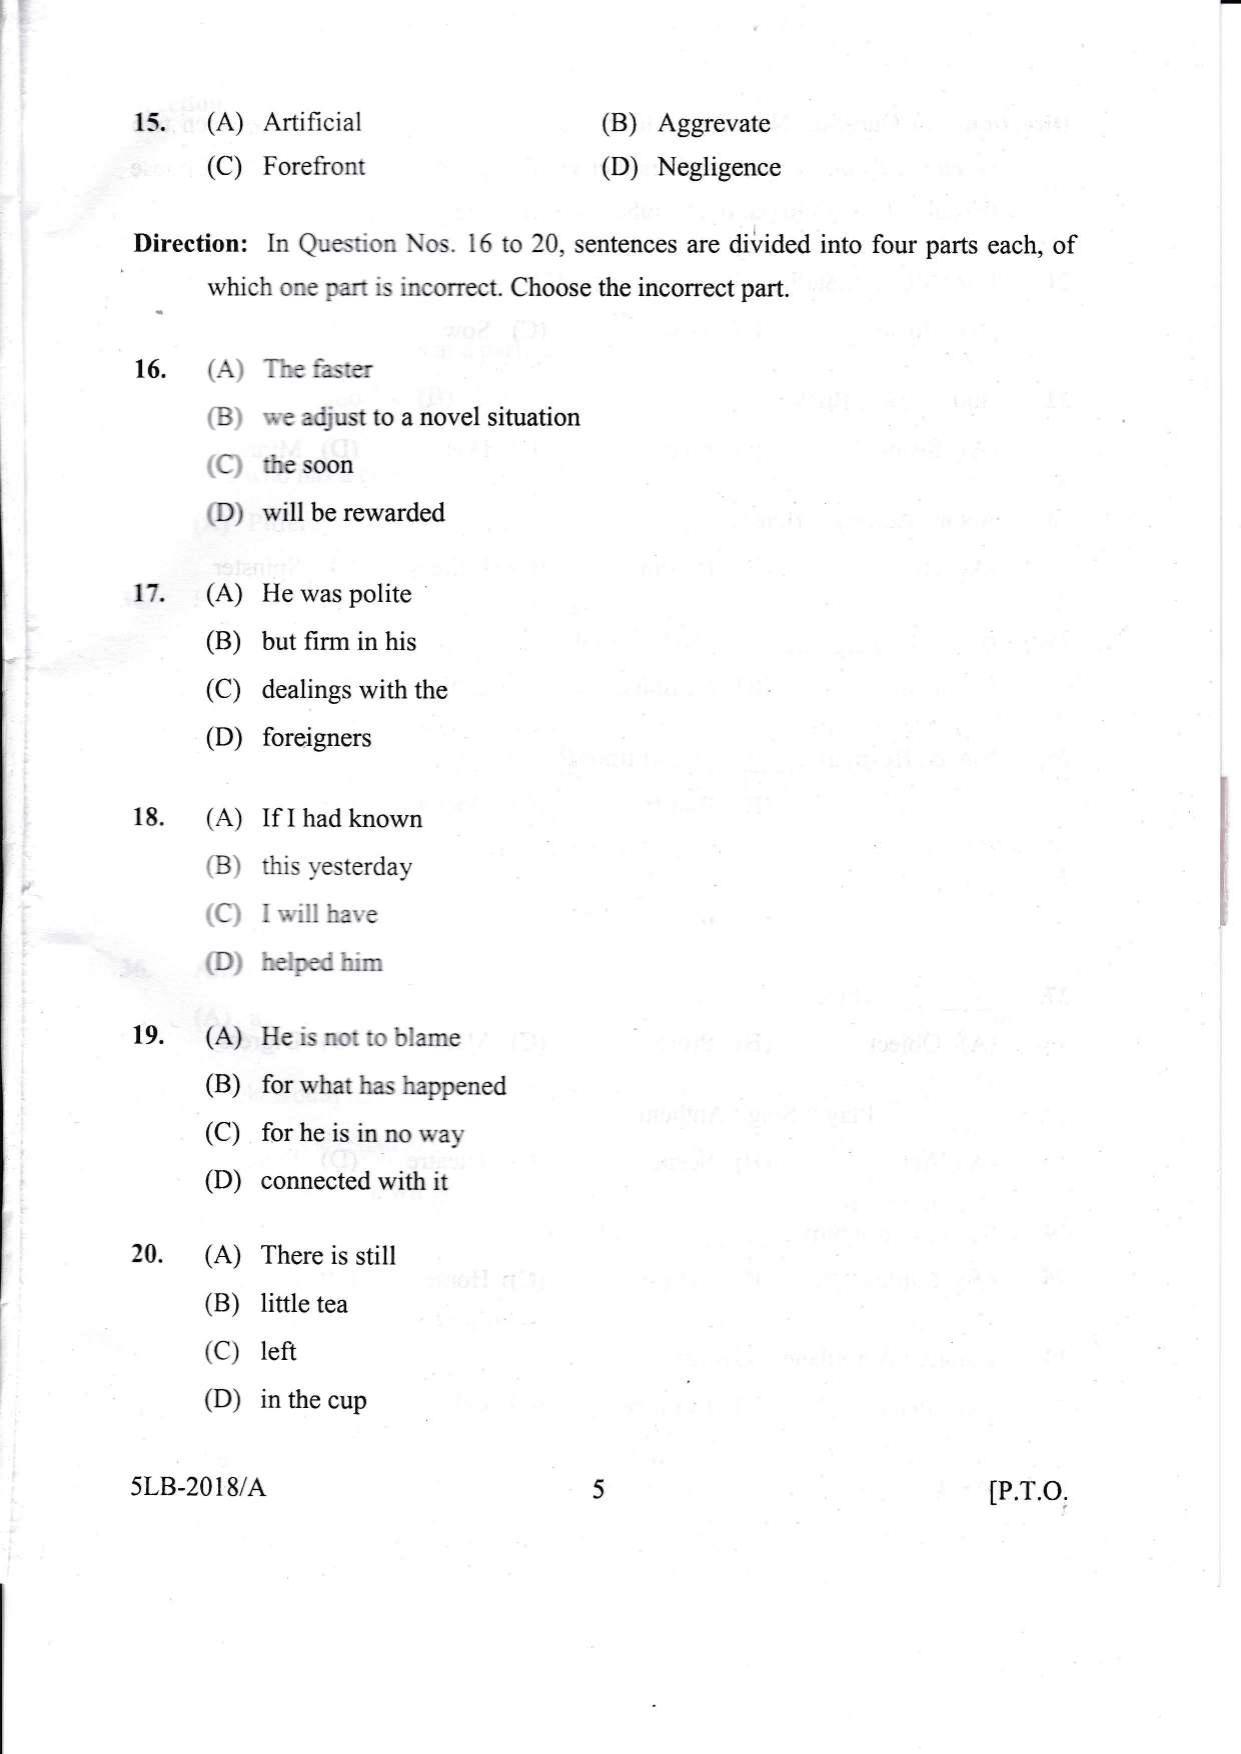 KLEE 5 Year LLB Exam 2018 Question Paper - Page 5